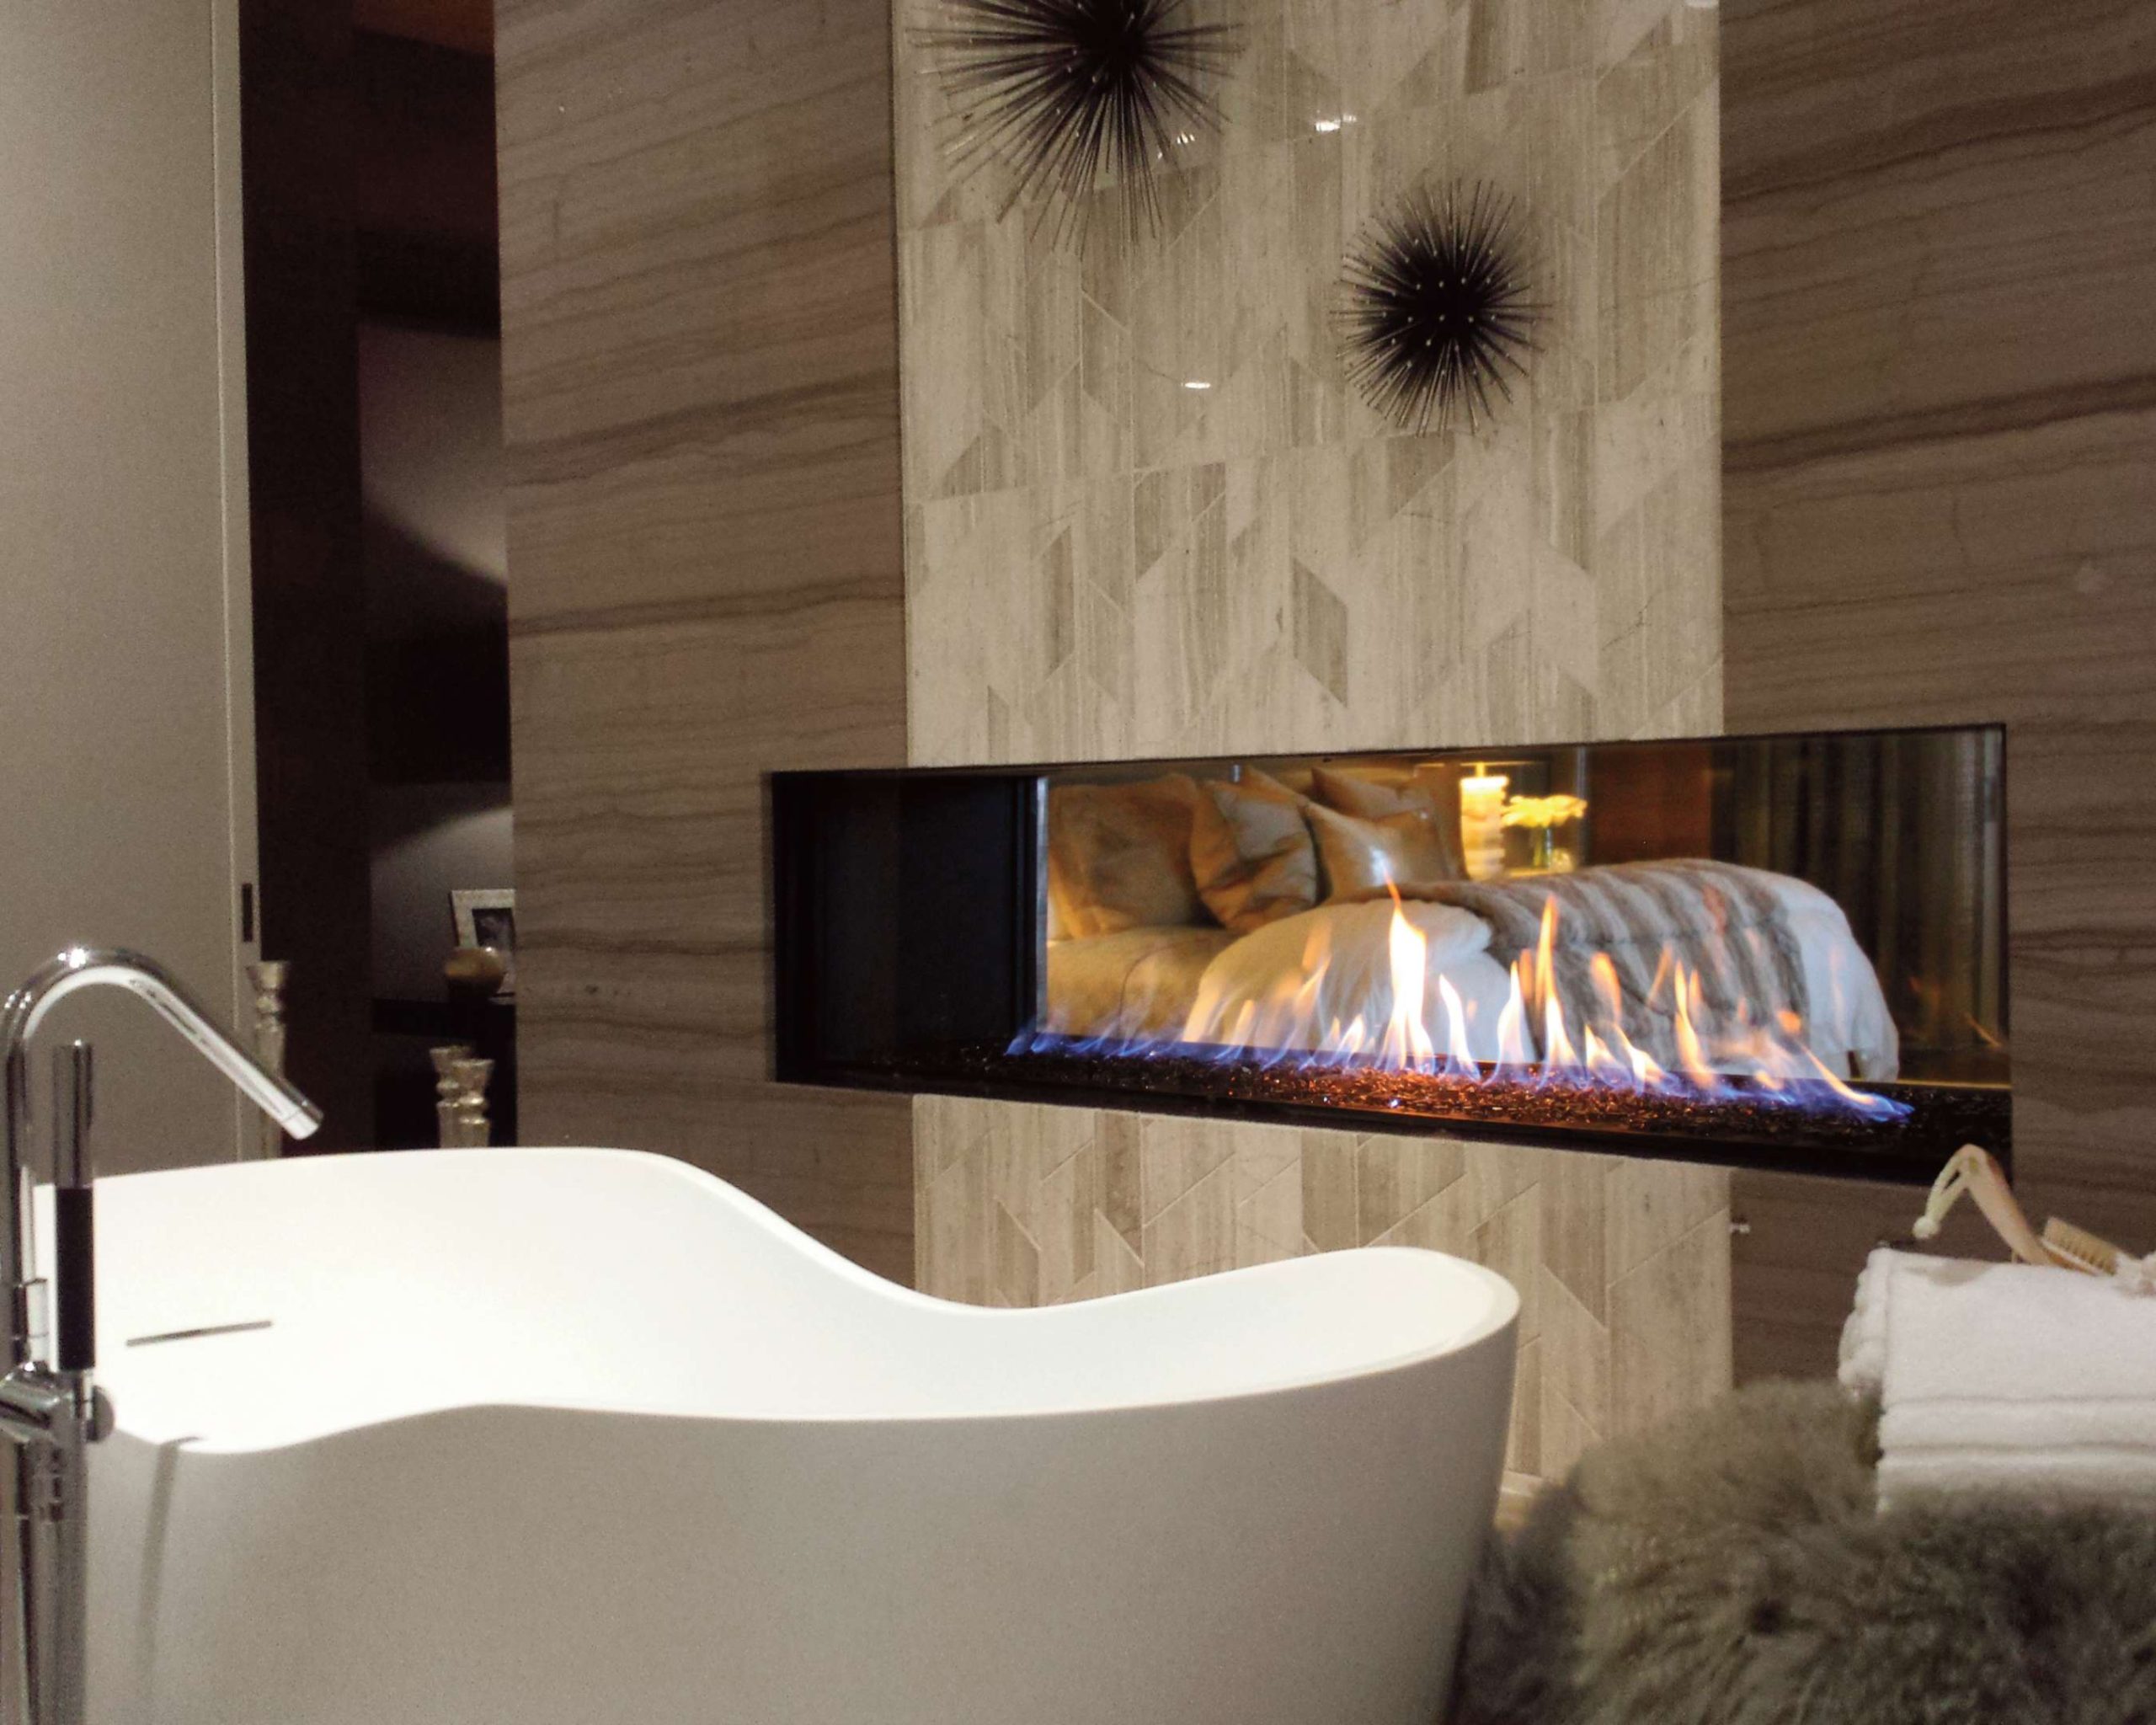 Reasons To Create A Bathroom With A Fireplace